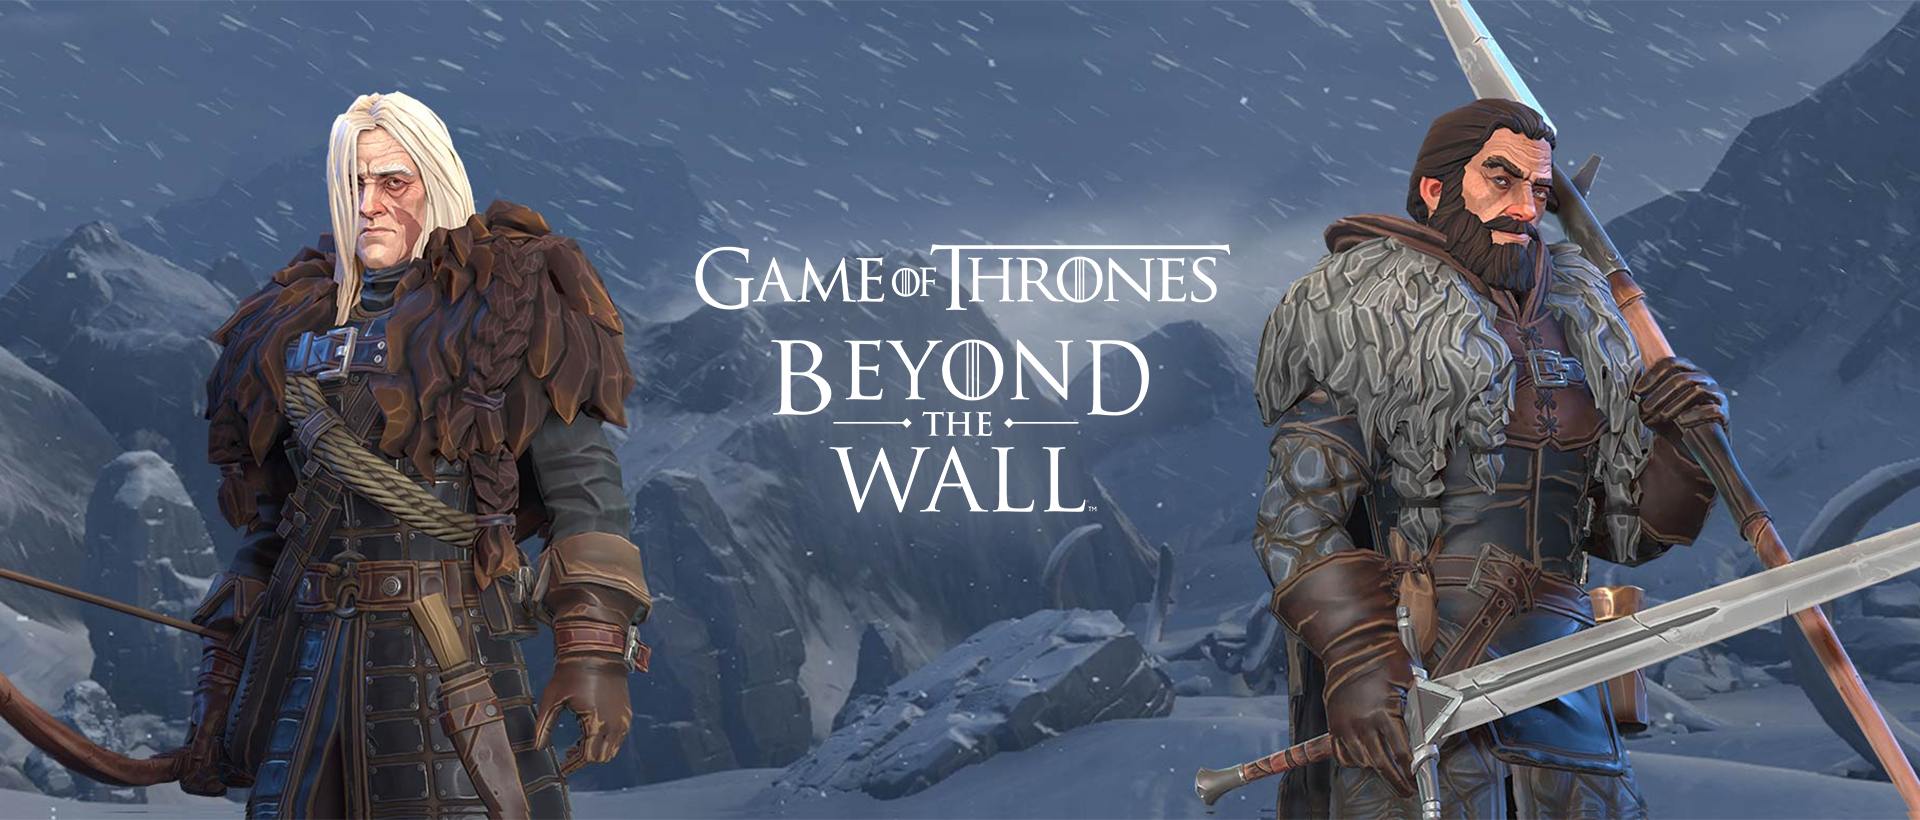 game of thrones beyond the wall tvtropes